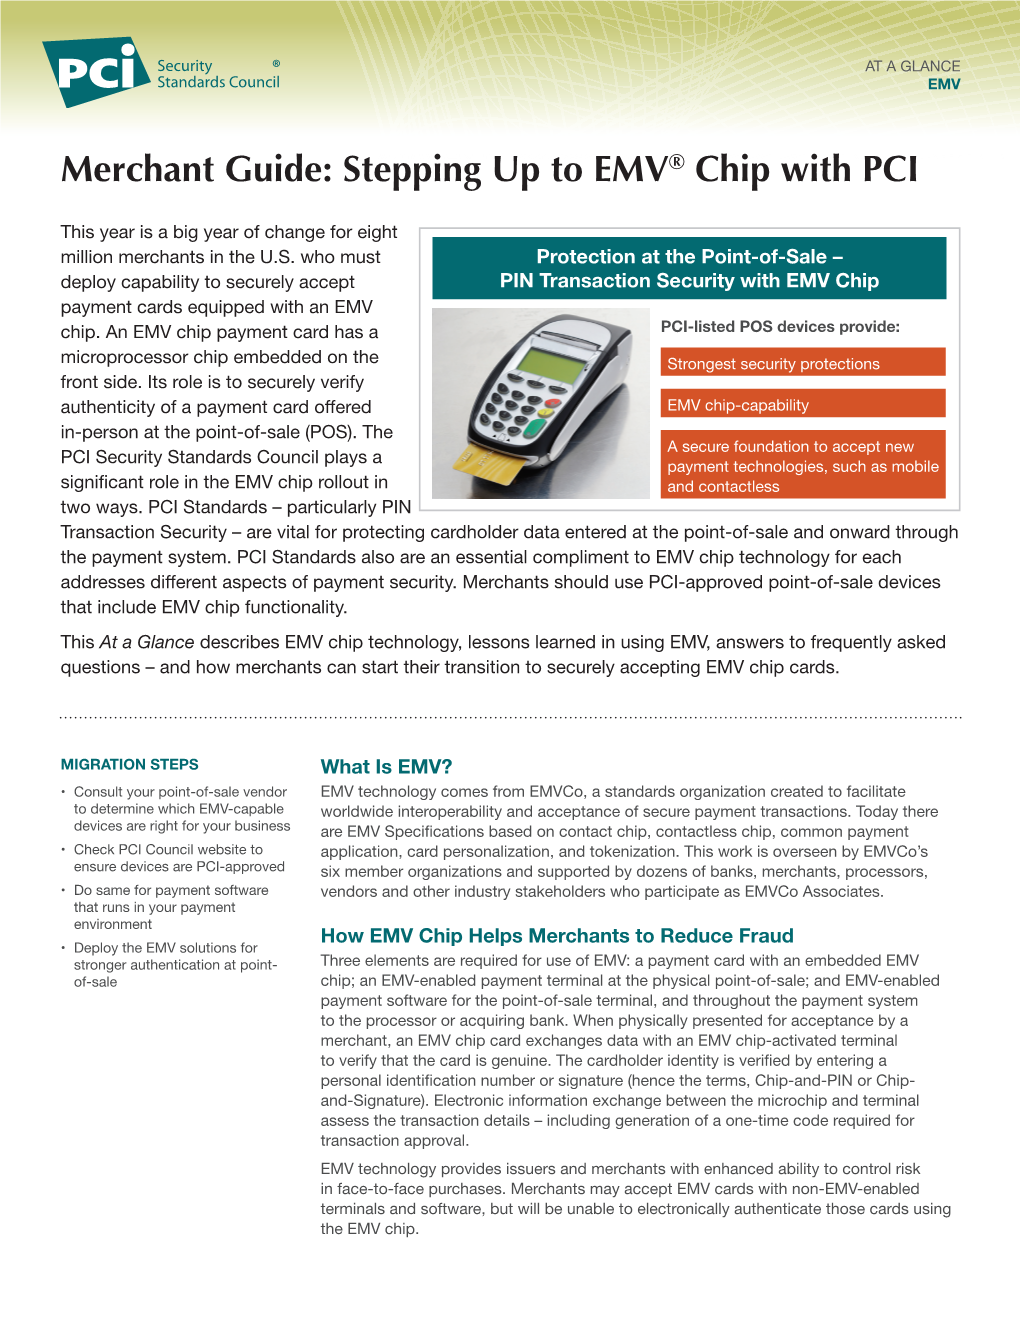 Merchant Guide: Stepping up to EMV® Chip with PCI